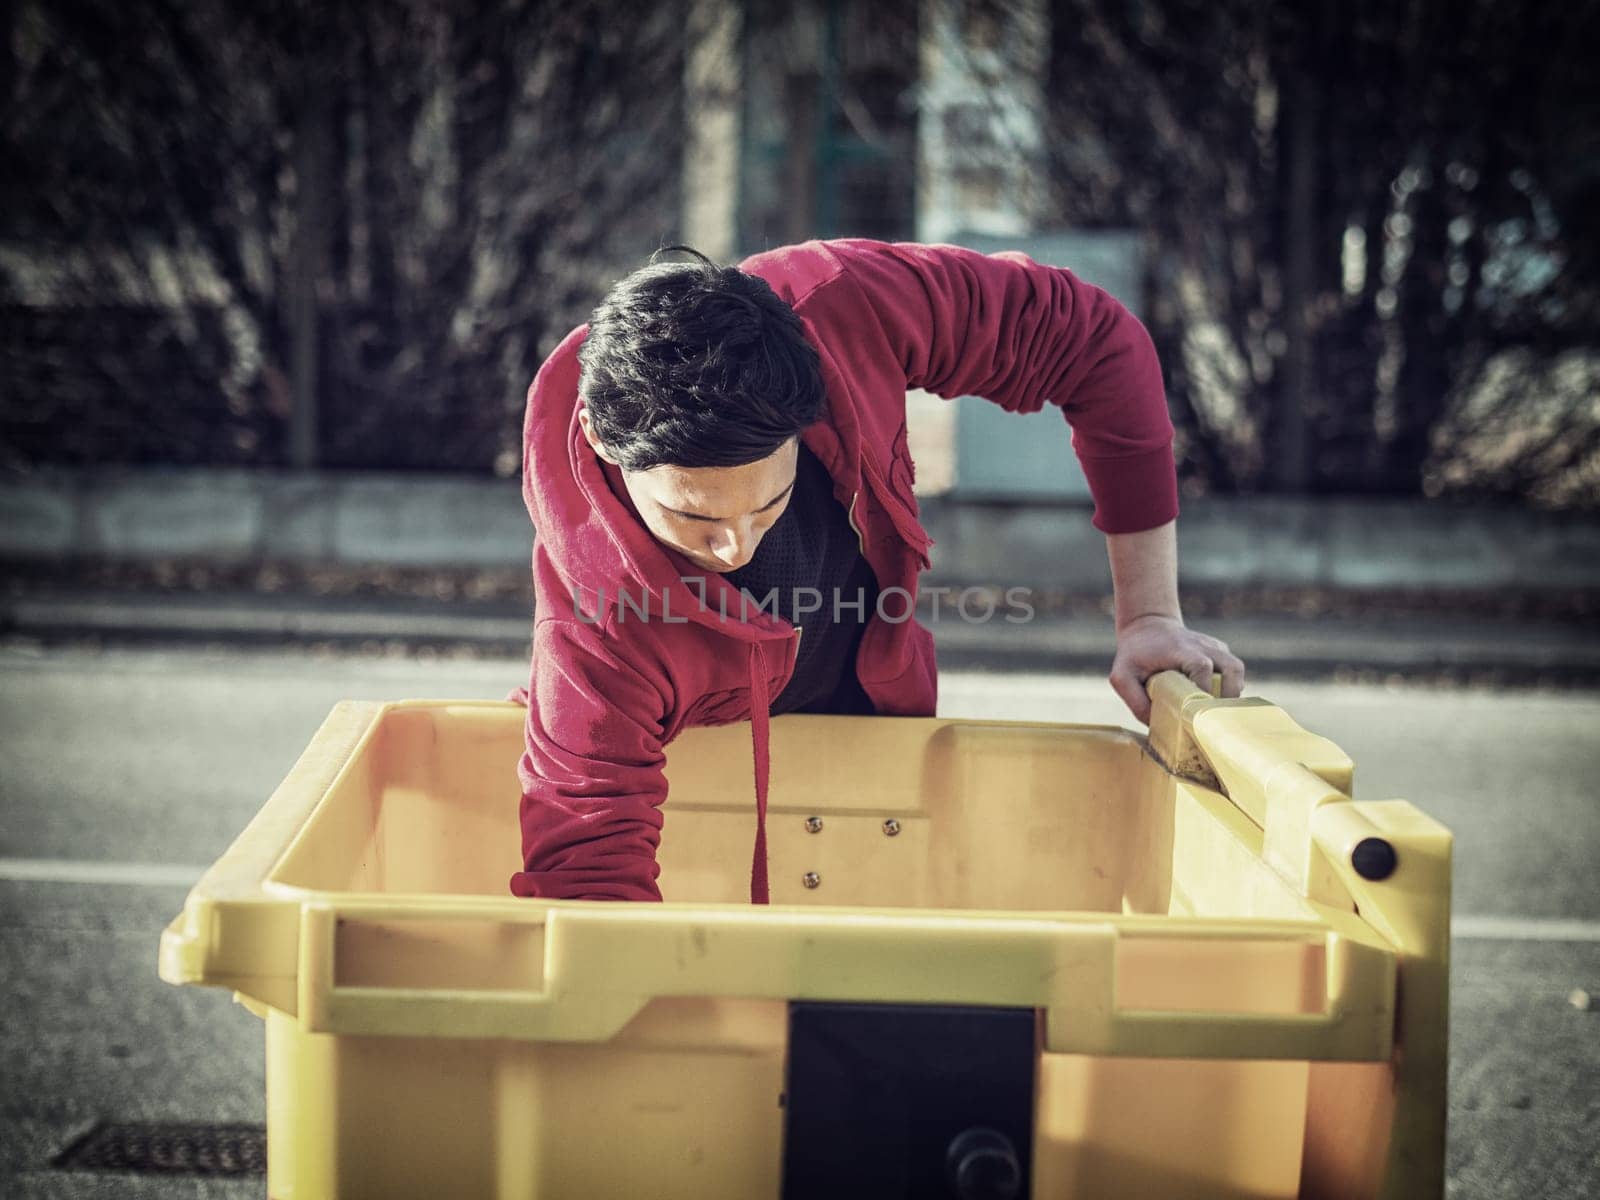 Young man searching inside garbage bin for stuff by artofphoto